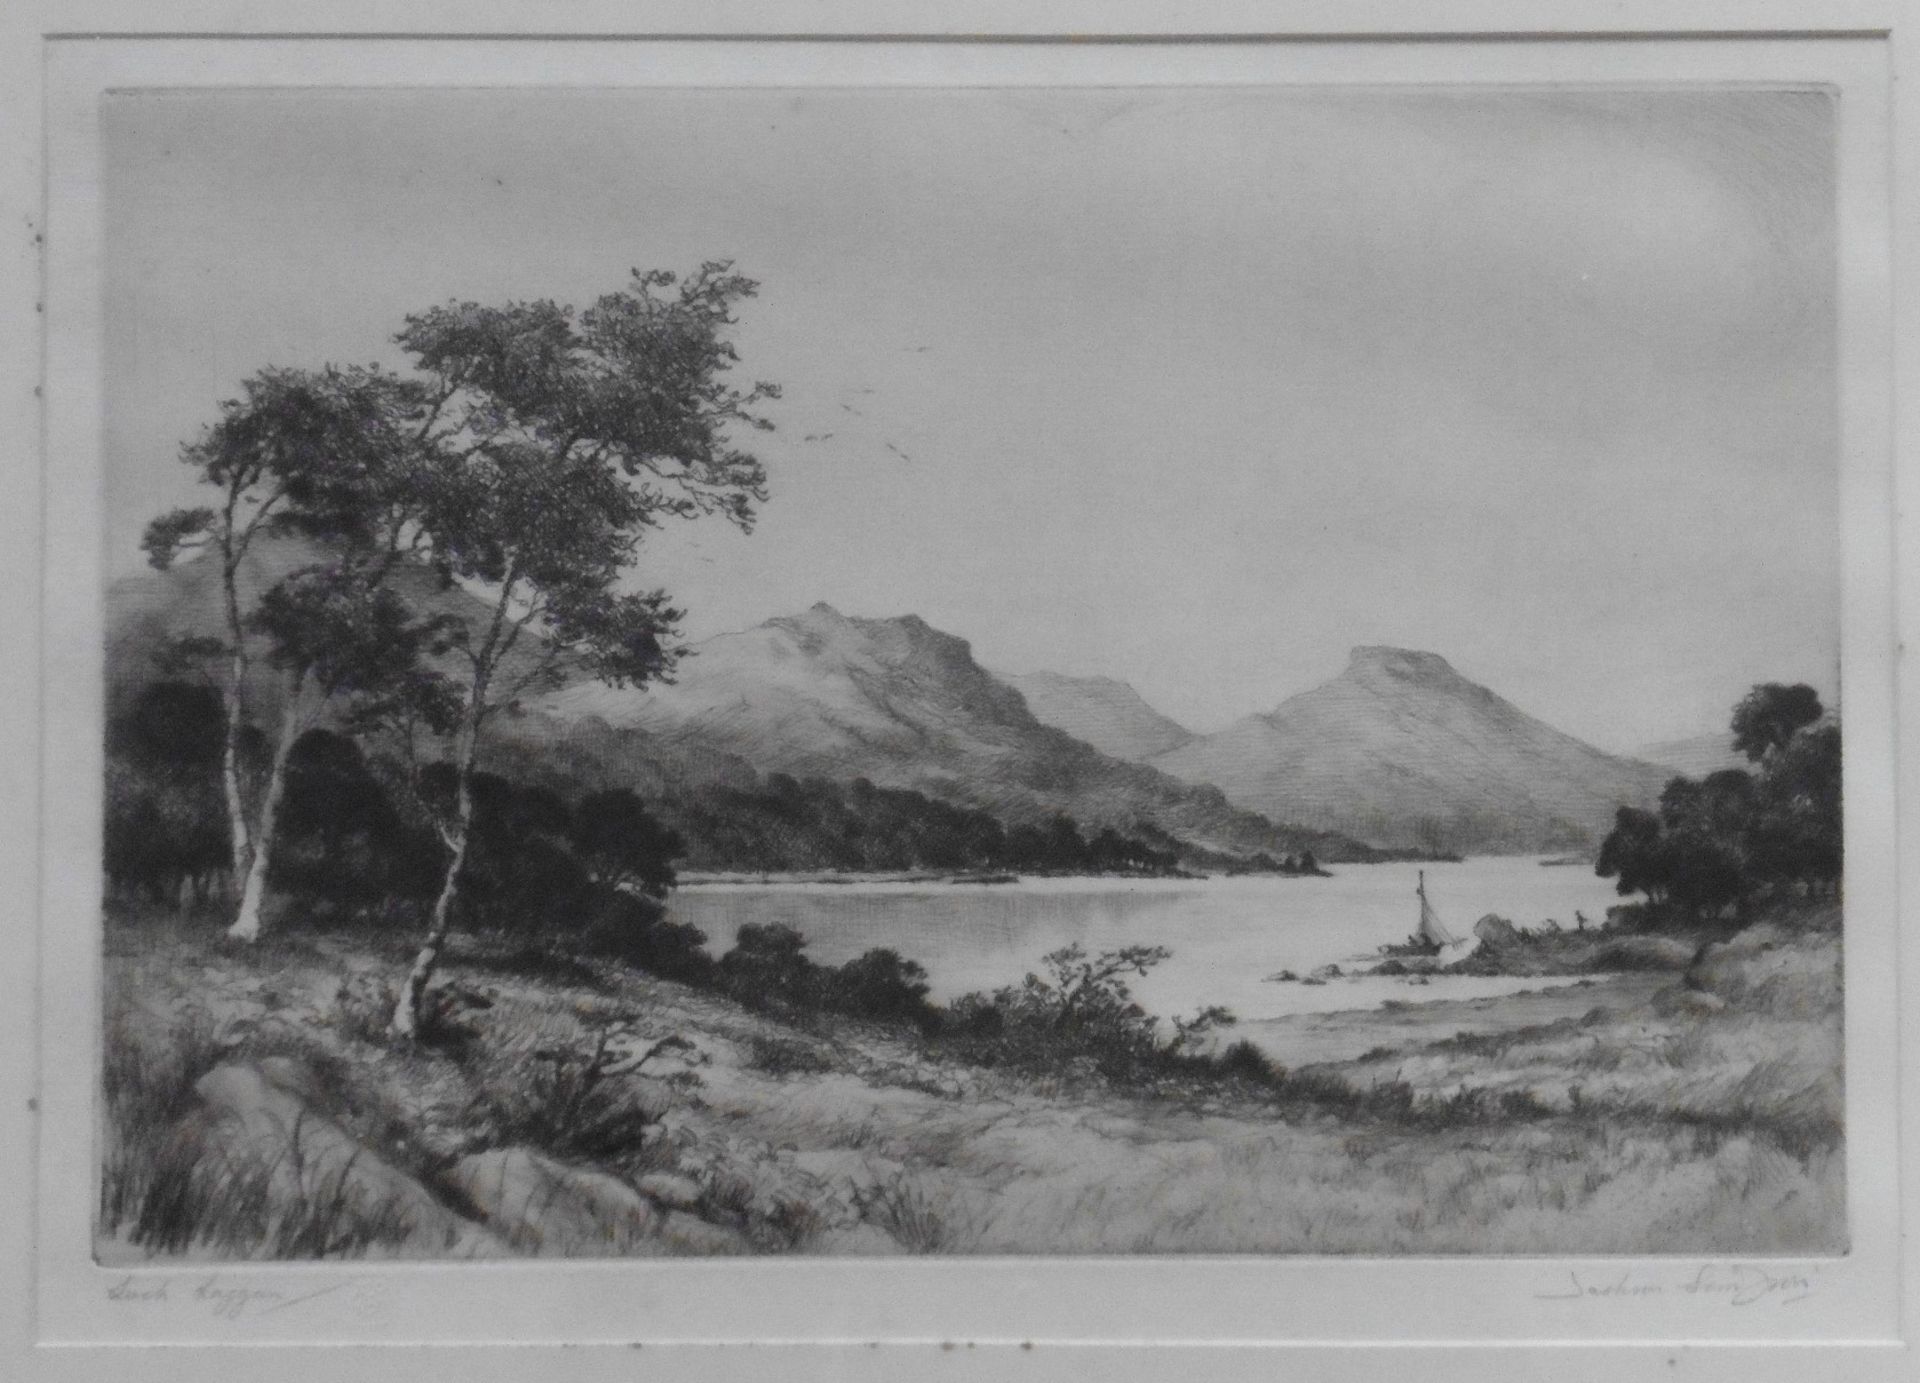 James Mcardle (Jackson Simpson) Limited edition Proof etching “Loch Katrine” (The silver strand)